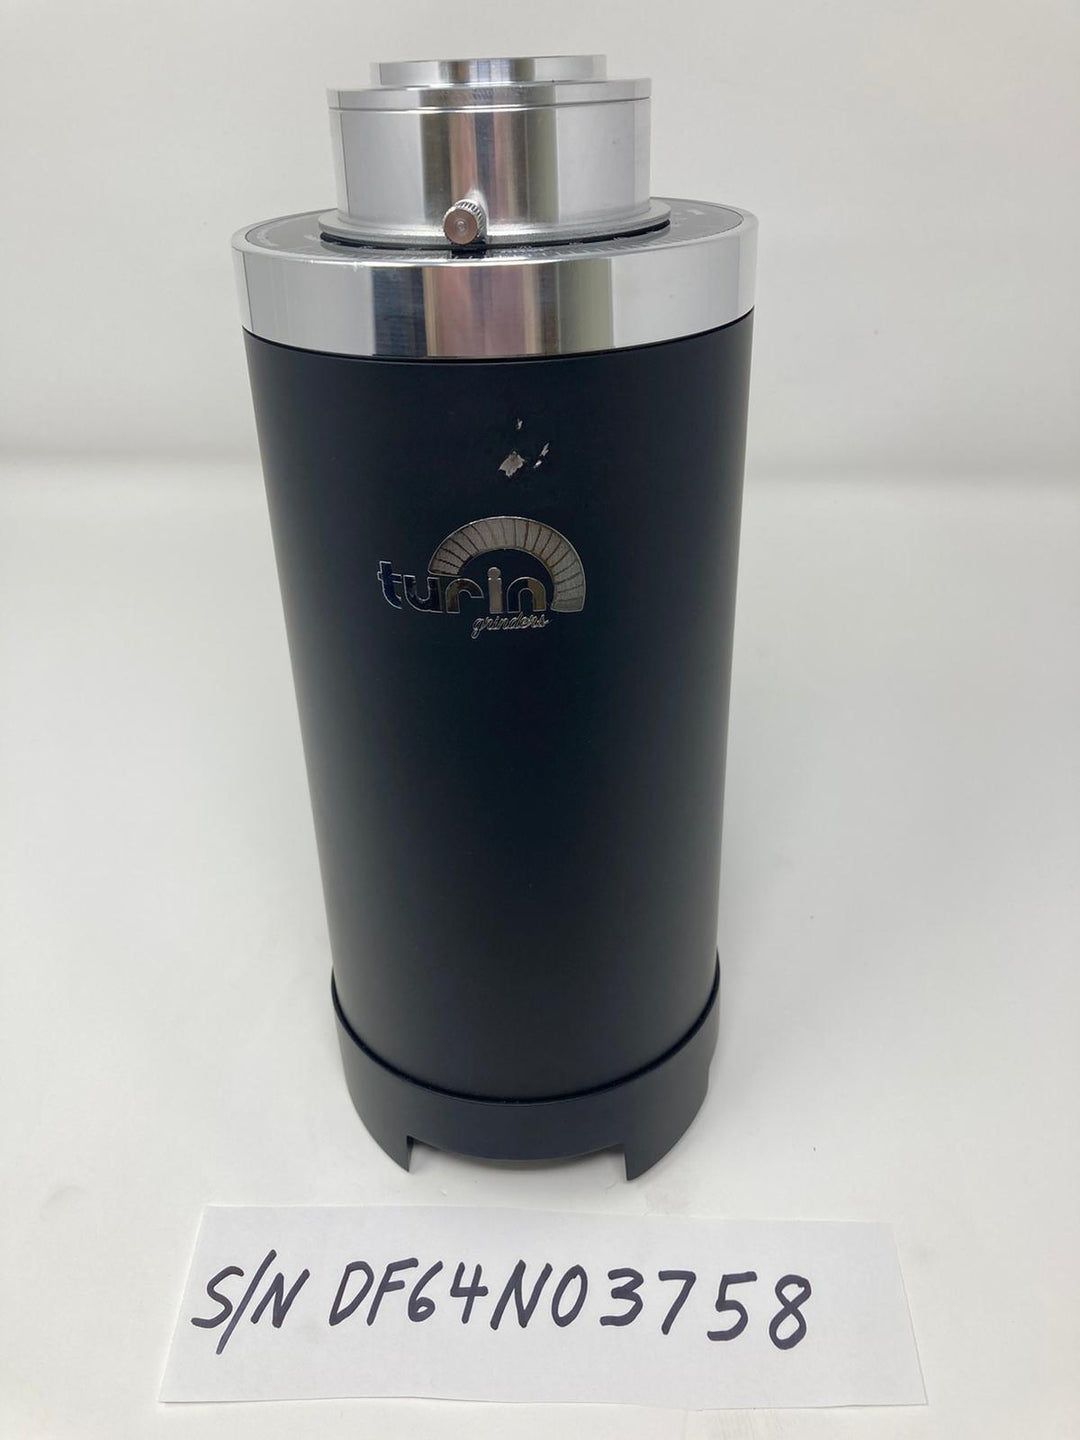 OPEN BOX WITH LIGHT DAMAGE Turin DF64 Gen 2 Single Dose Coffee Grinder